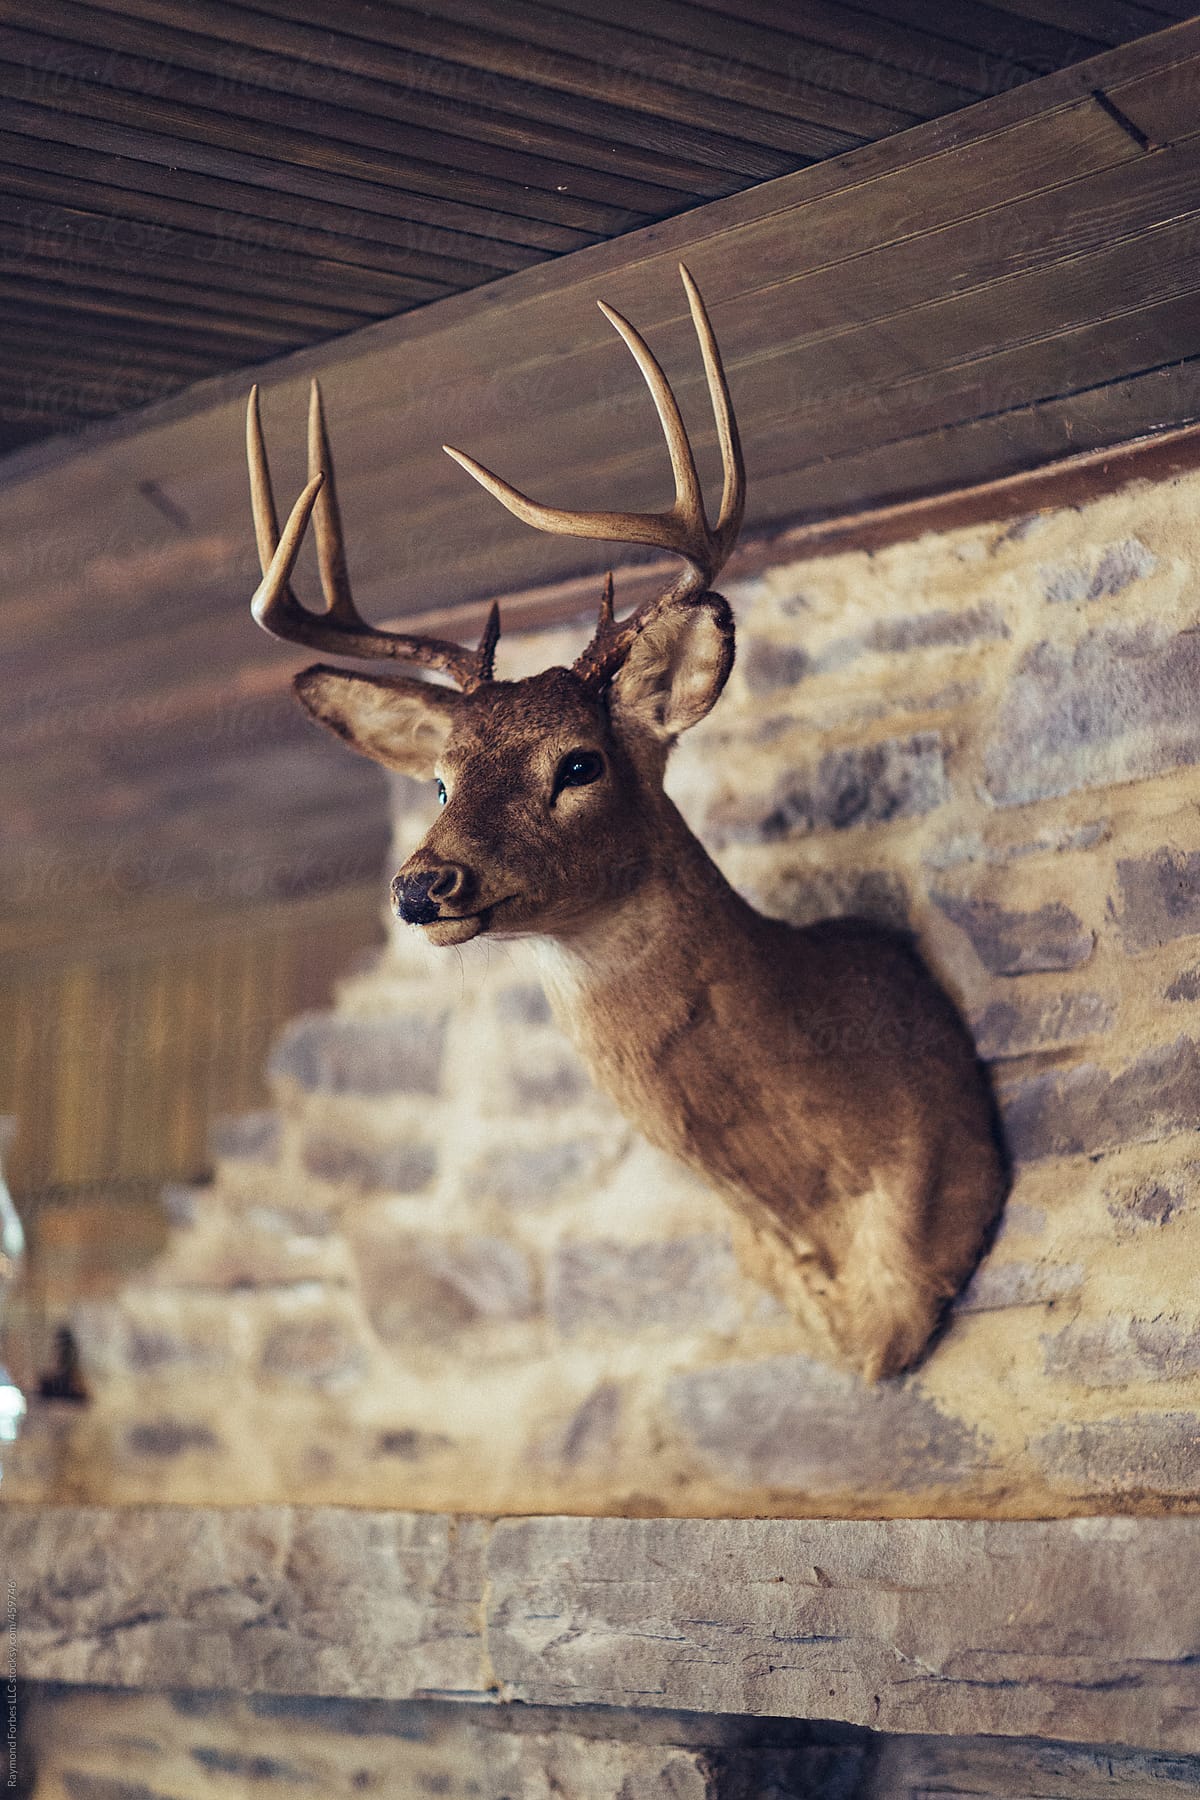 Deer Trophy above the Fireplace Mantle